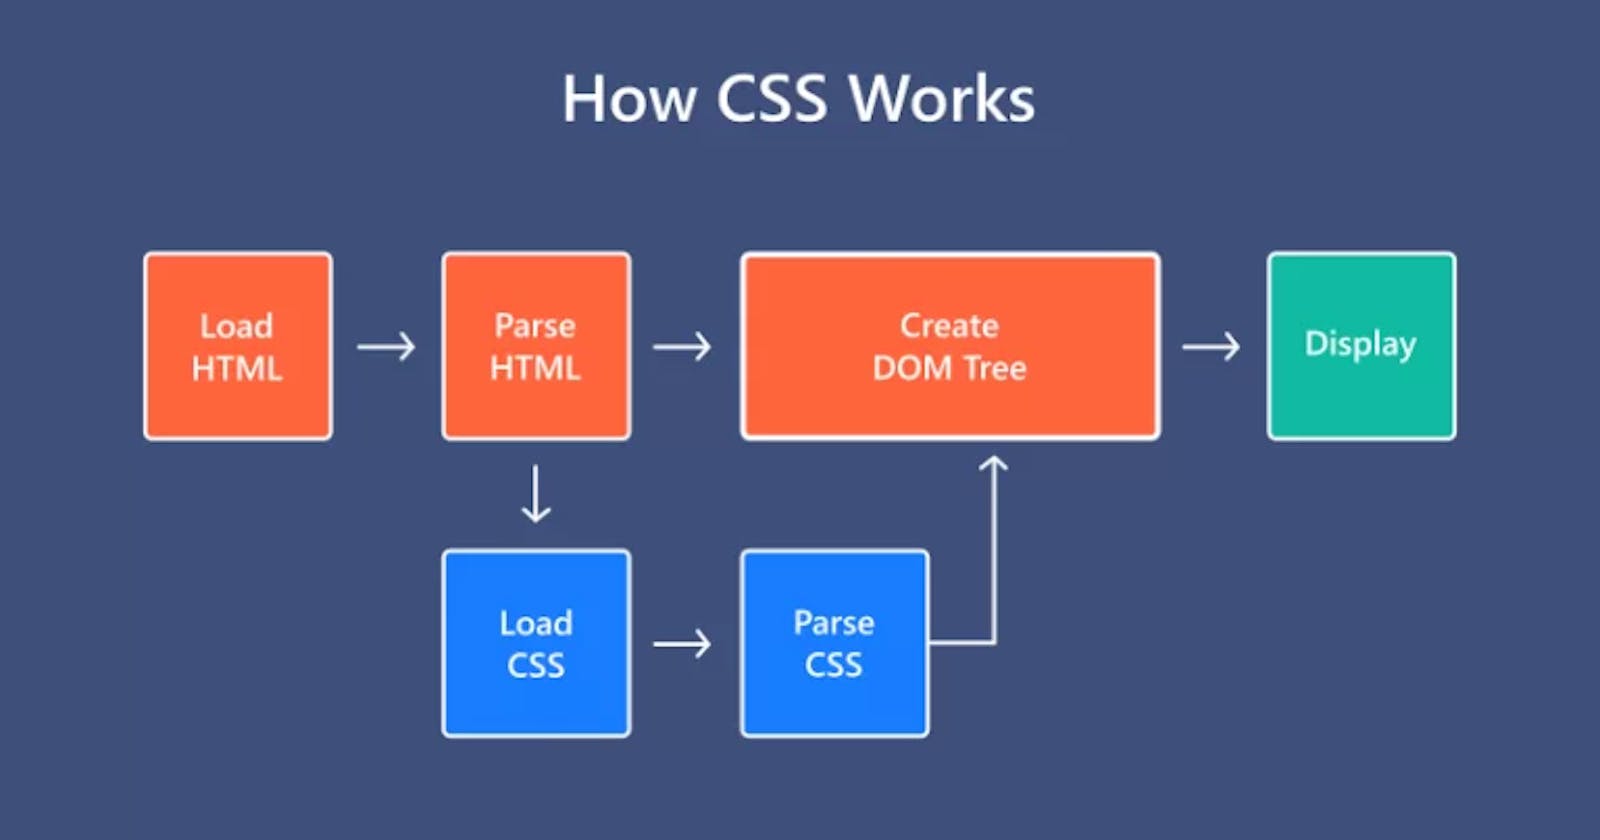 Basic of CSS(Cascading Style Sheets)